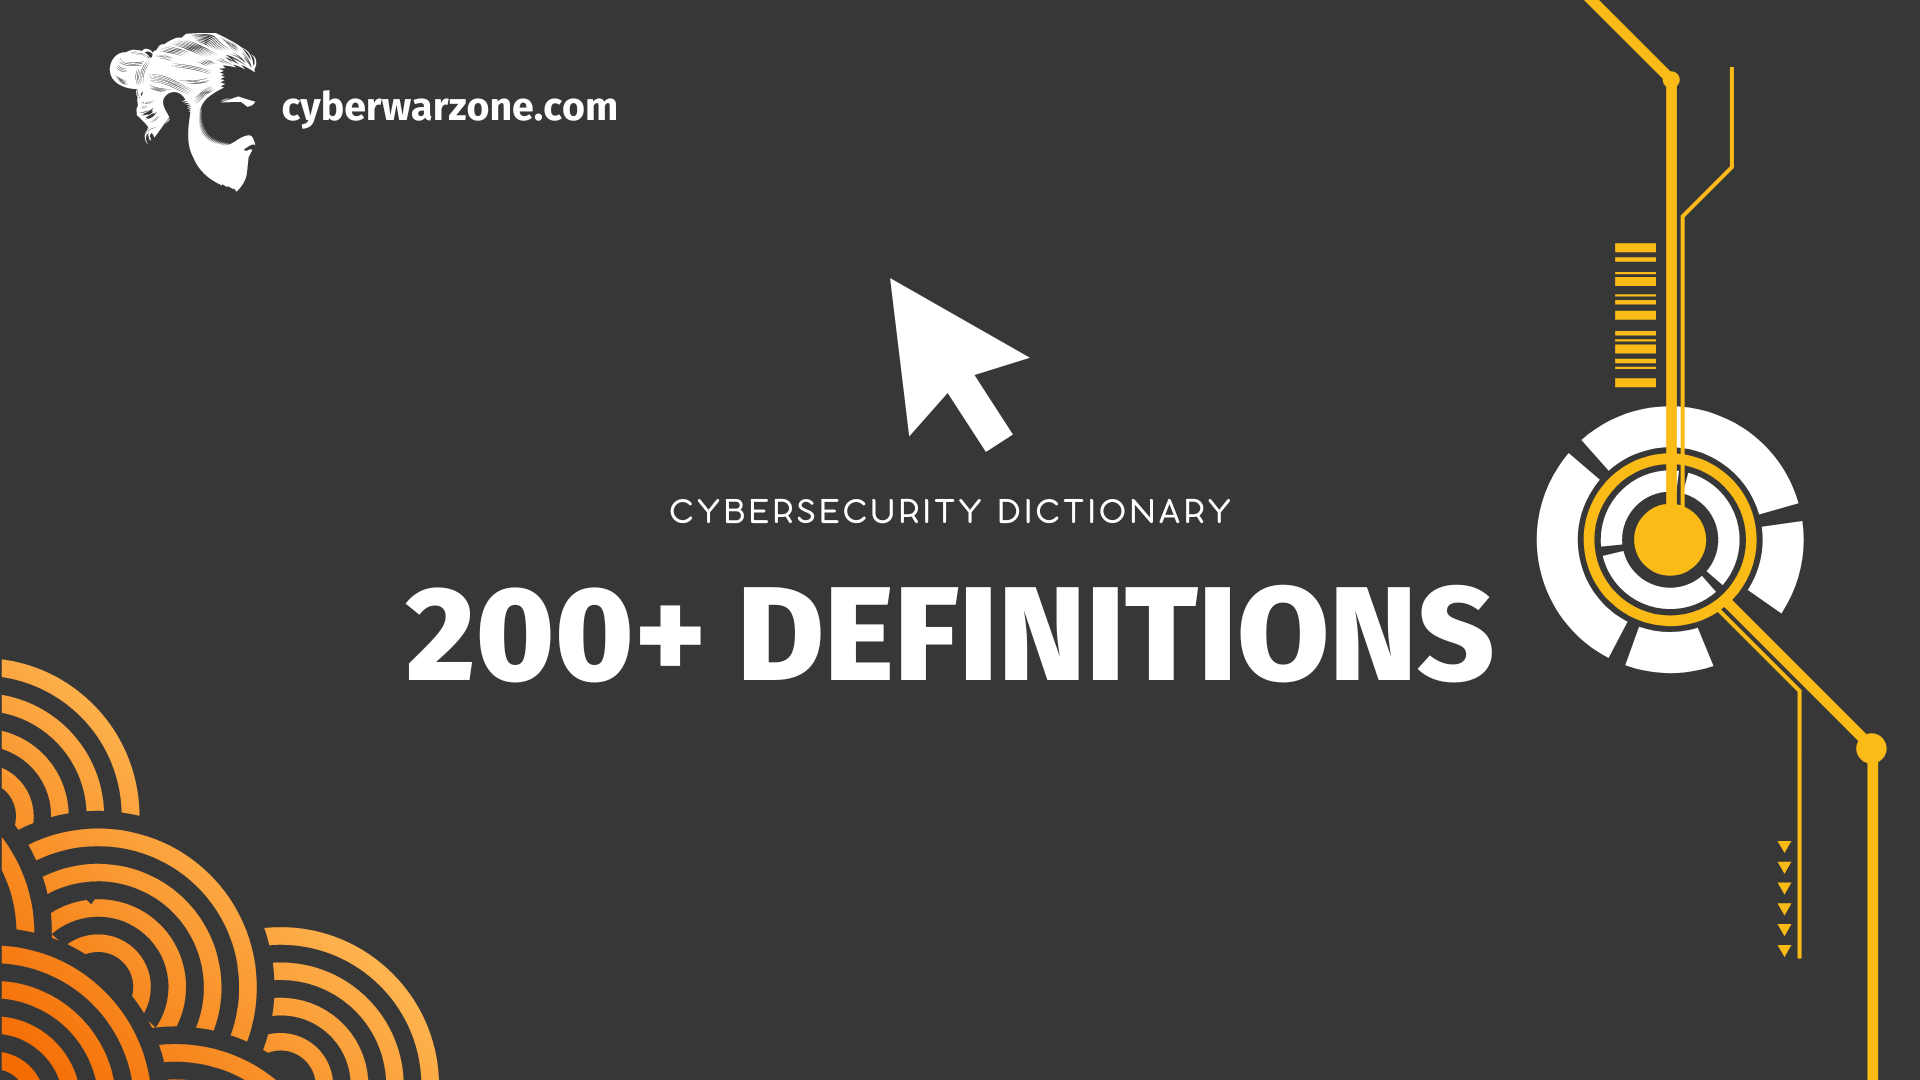 Cybersecurity Dictionary